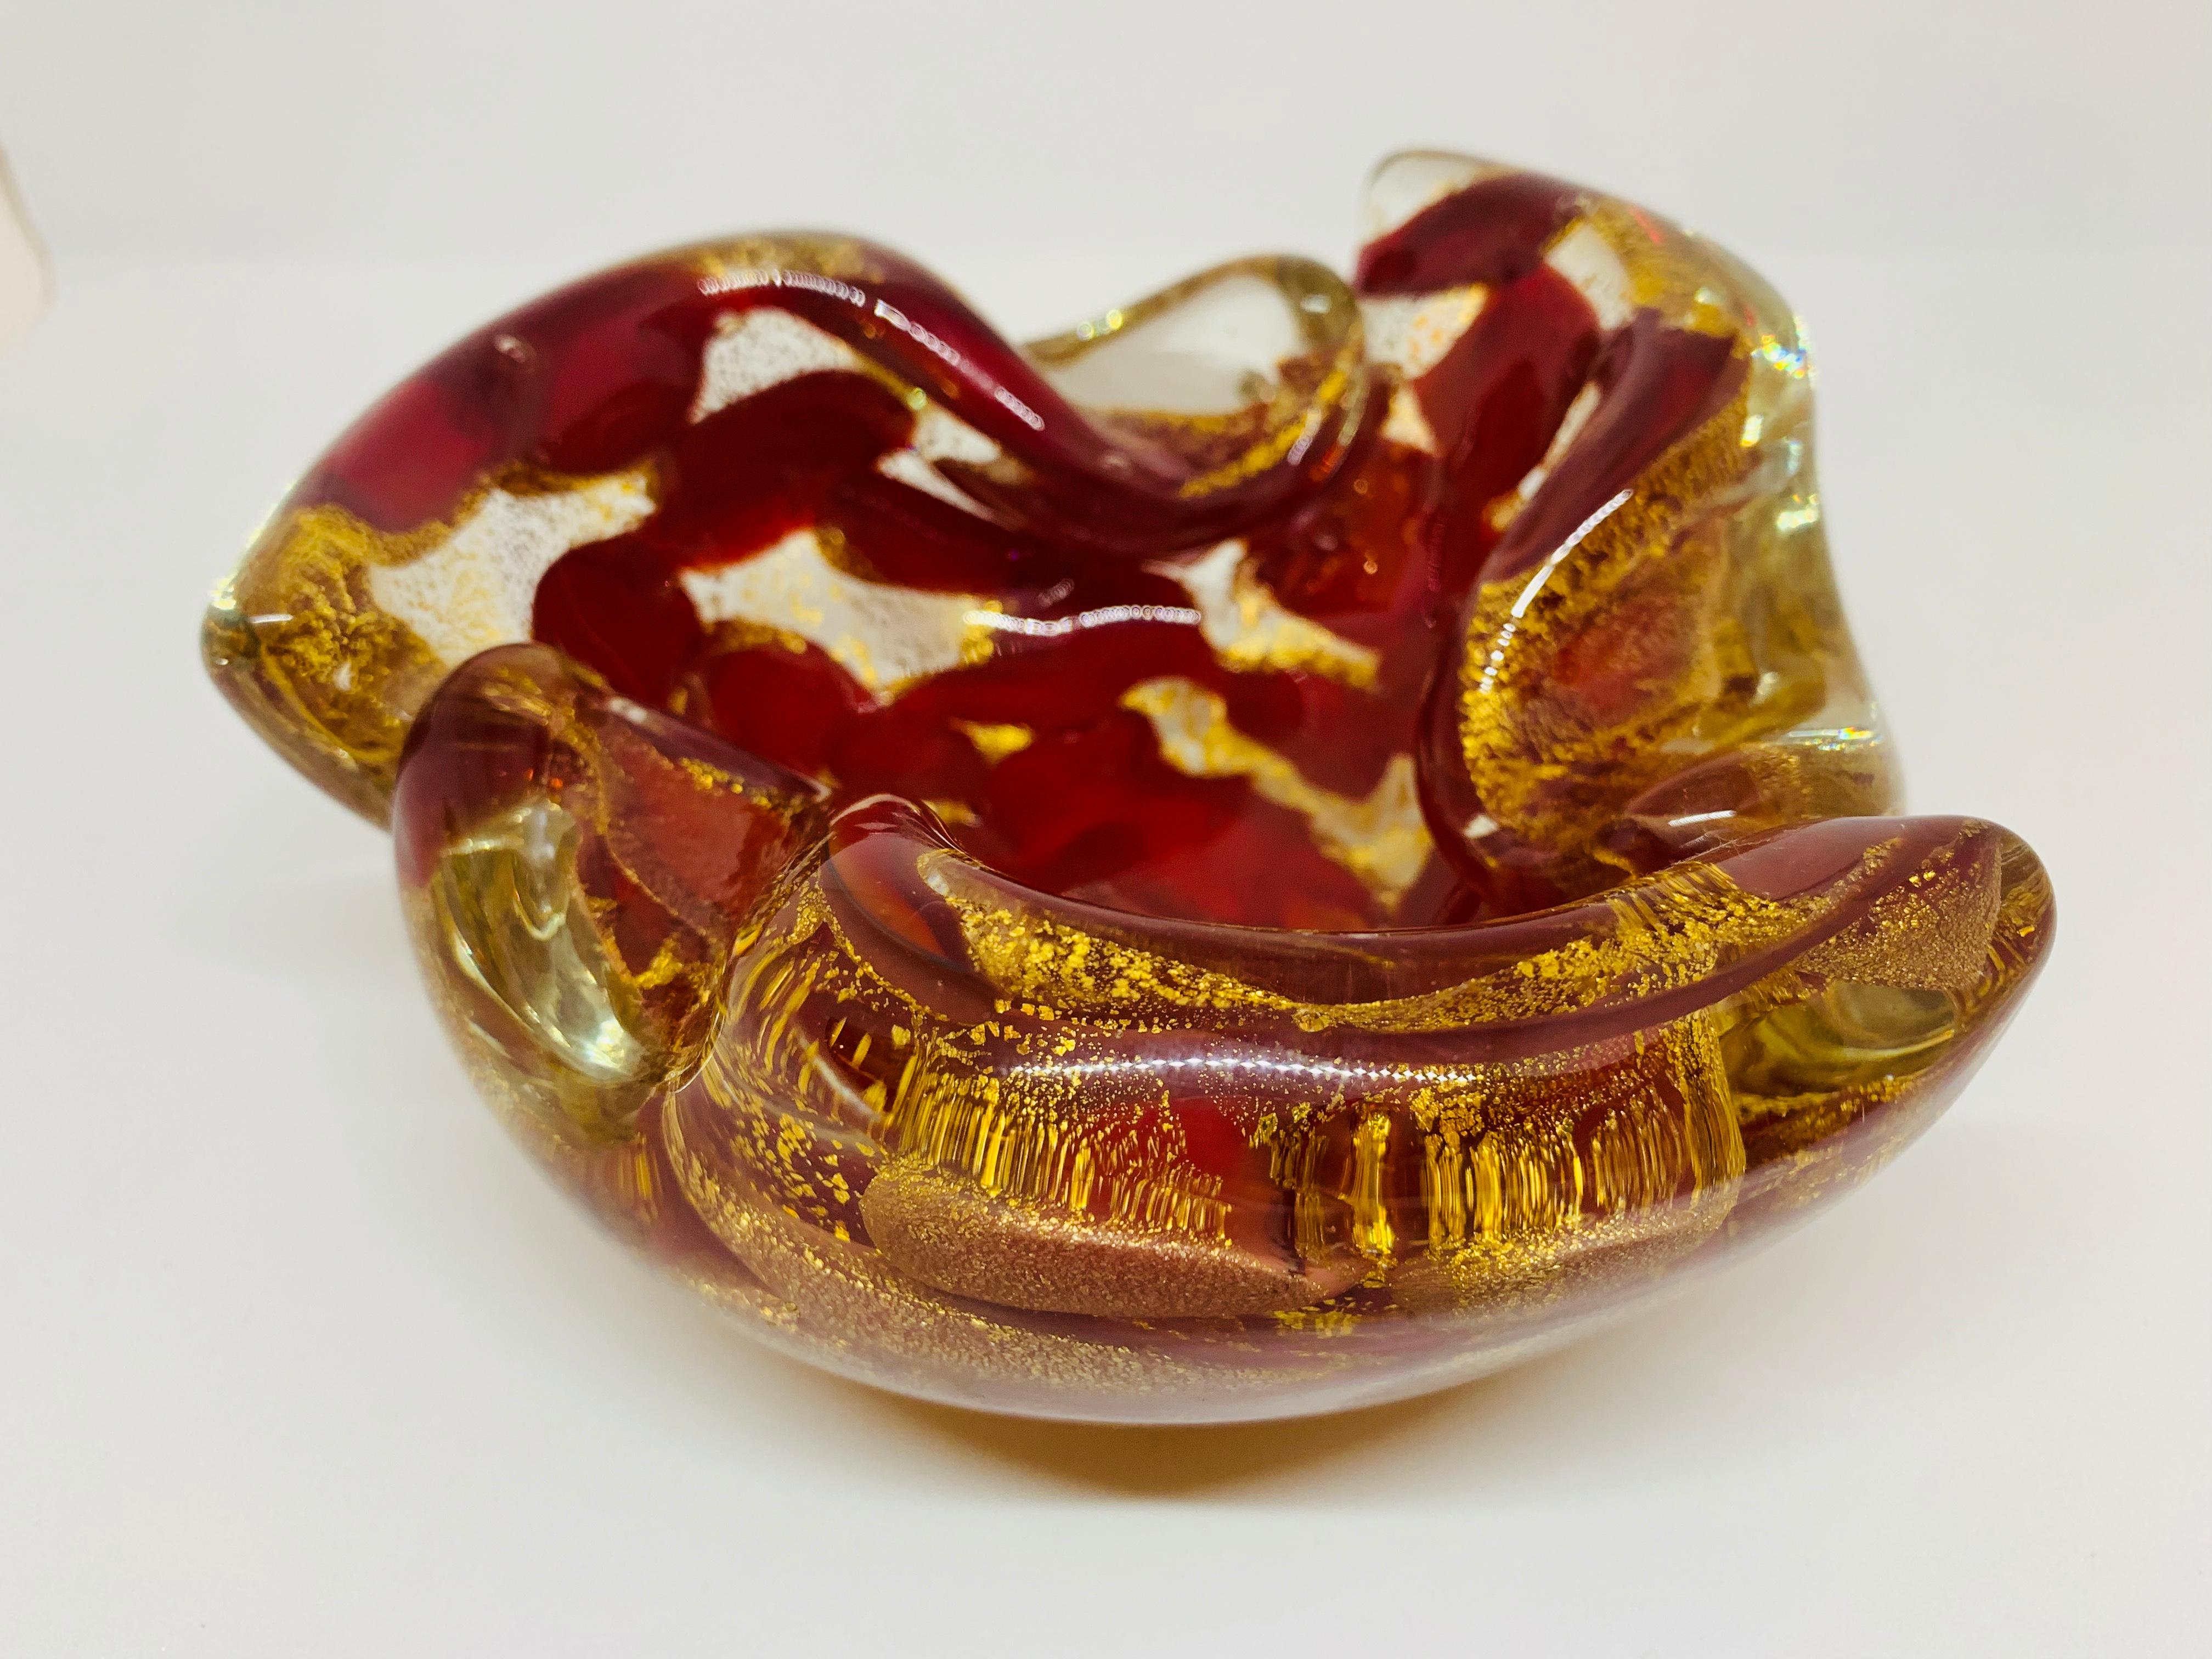 20th Century 1950s Italian Red and Gold Murano Glass Ashtray Bowl by Barovier and Toso